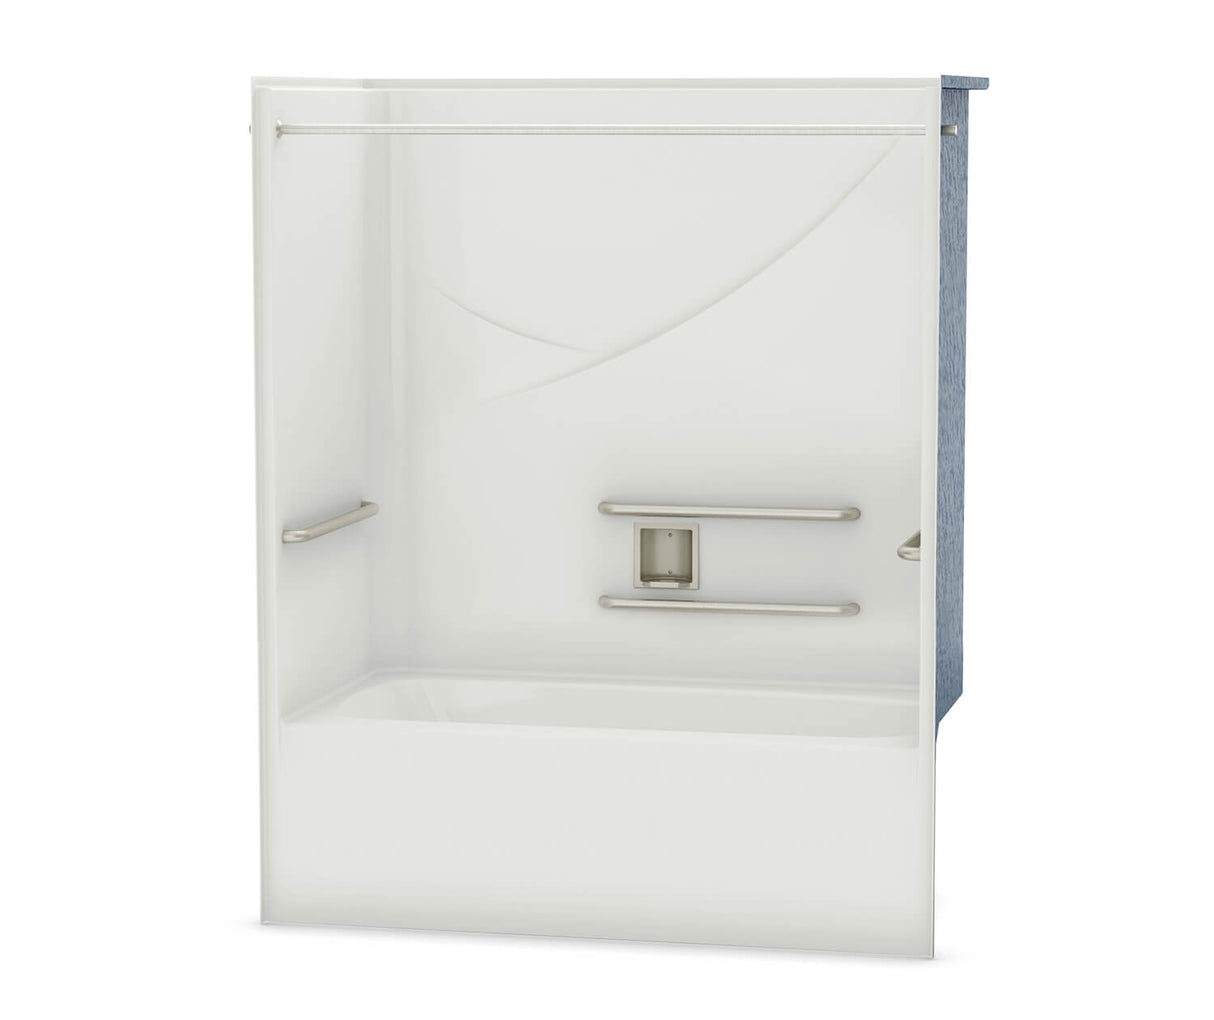 MAAX 106058-000-002-101 OPTS-6032 - ADA Grab Bars AcrylX Alcove Right-Hand Drain One-Piece Tub Shower in White